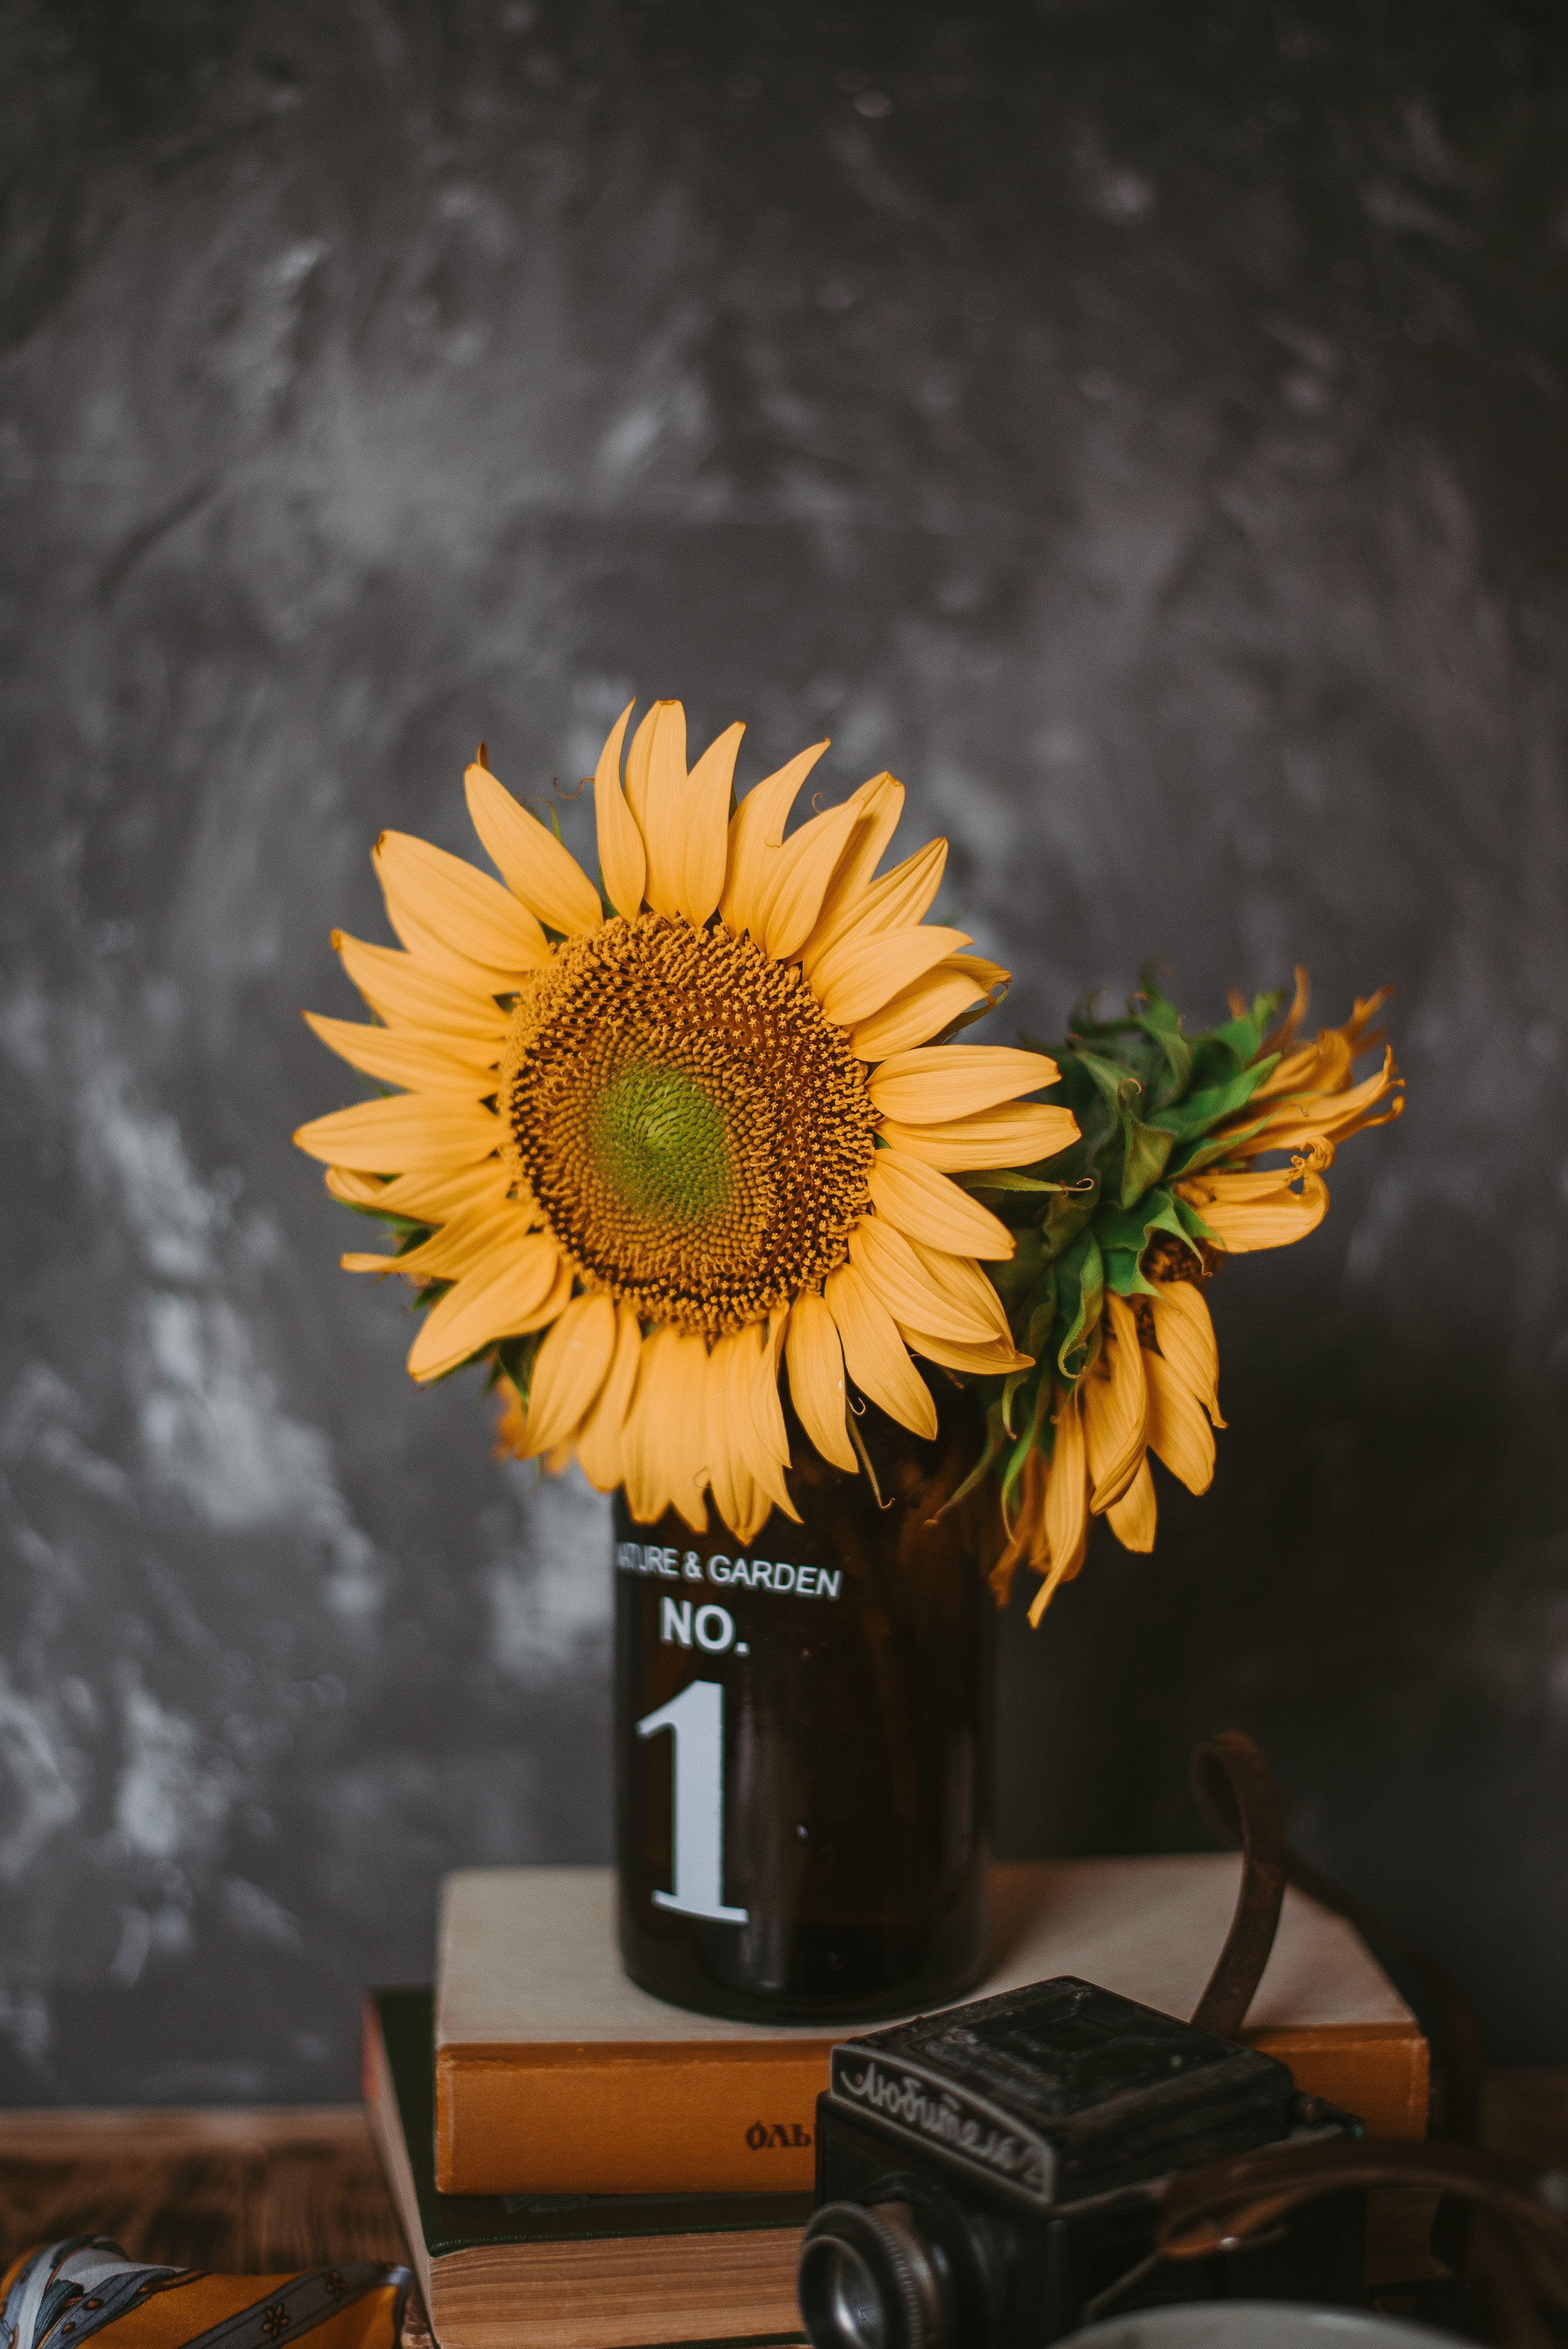 miscellanea, books, sunflowers, flowers, miscellaneous, vase, camera for android